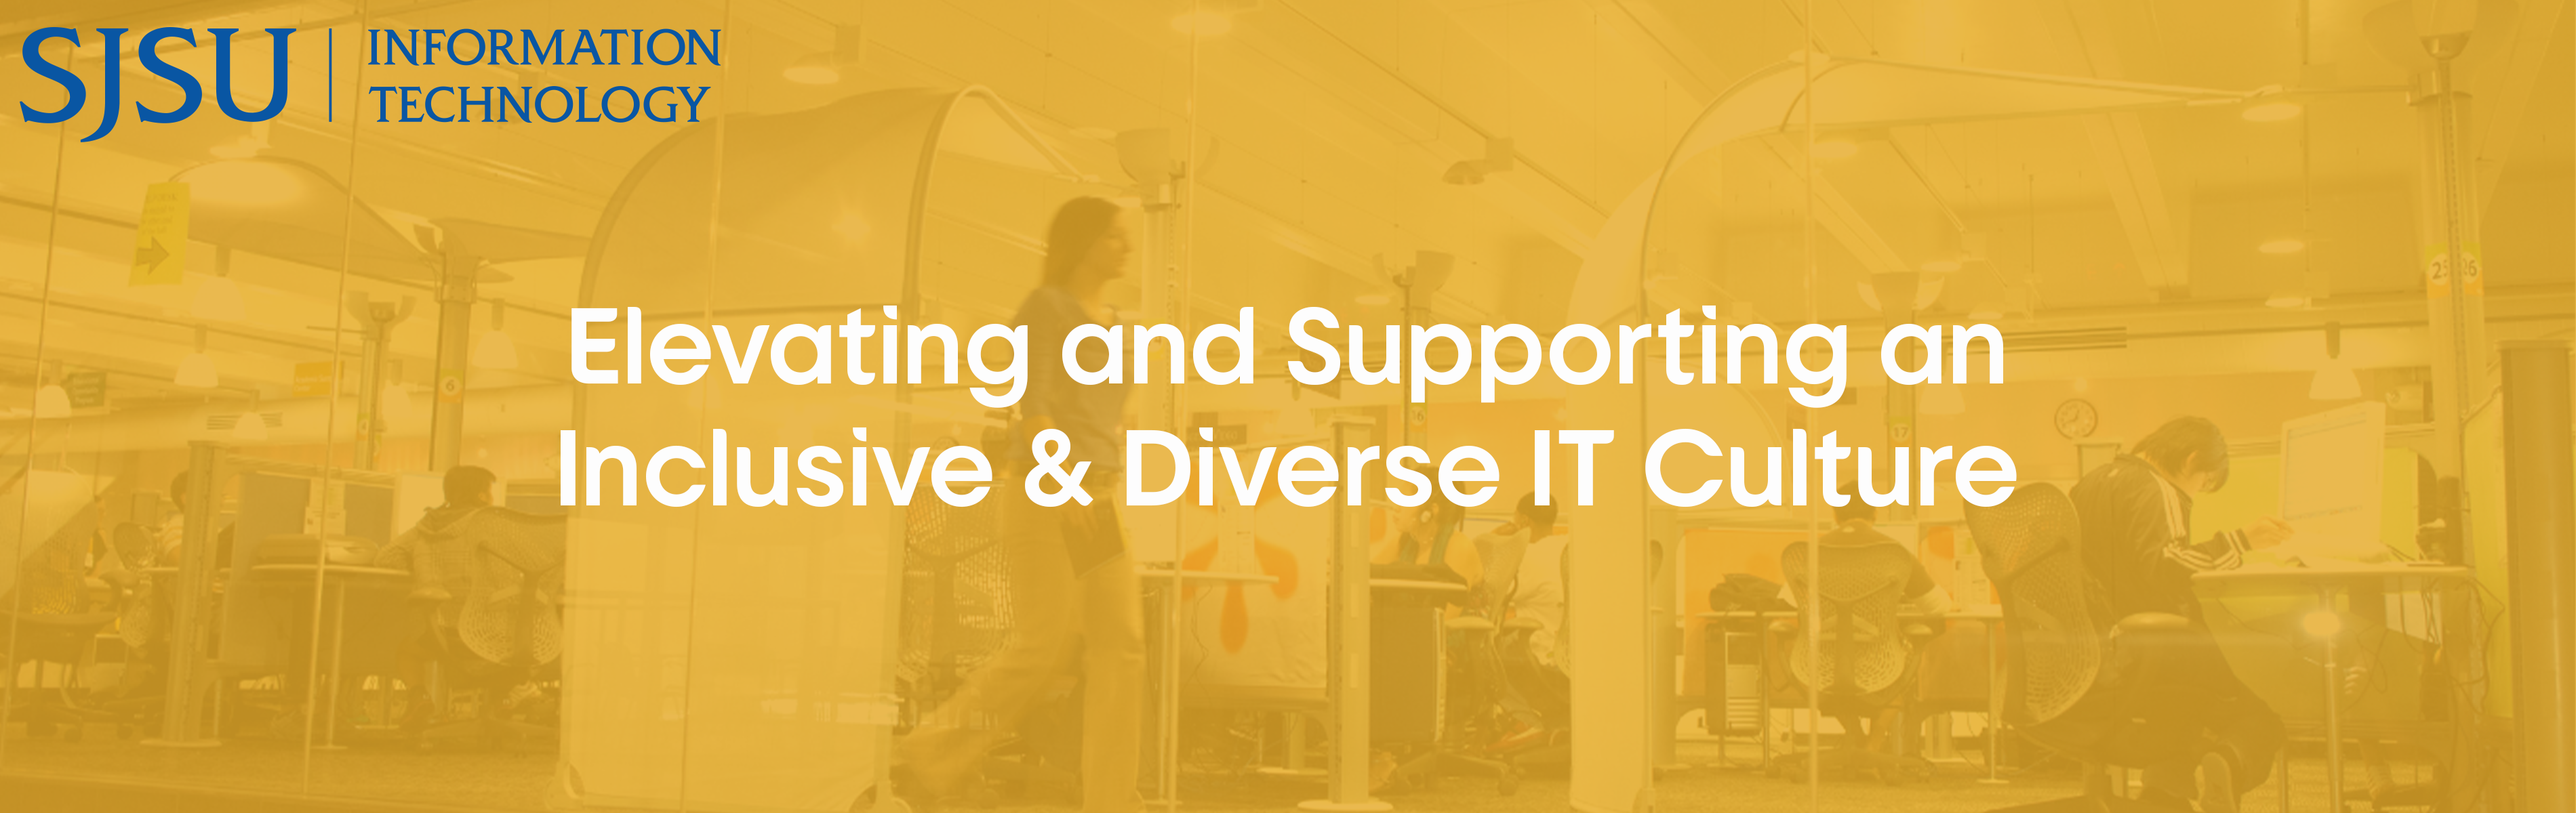 "Elevating and supporting an inclusive and diverse IT culture."